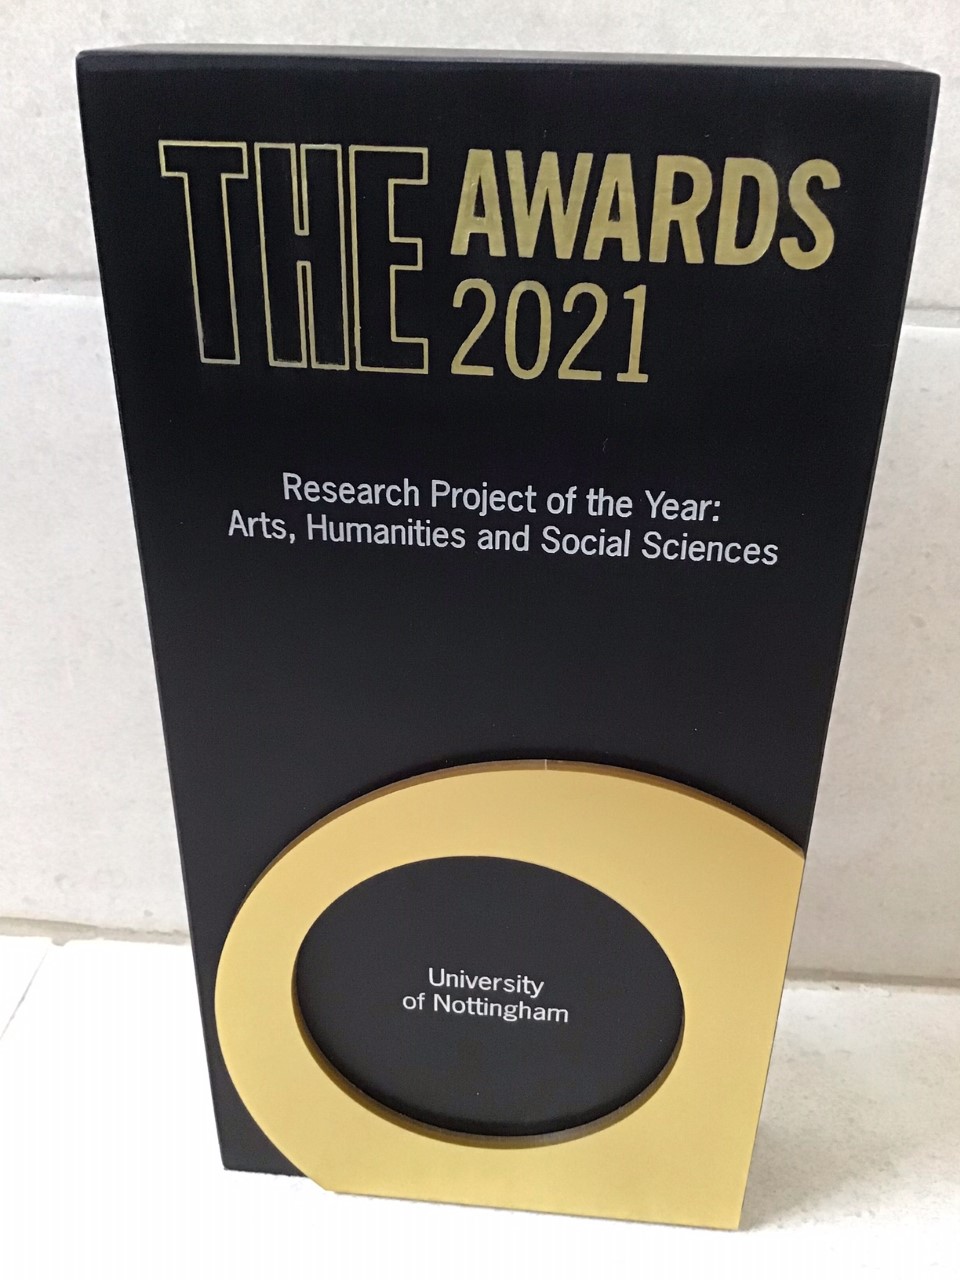 Trophy for winning the Times Higher Education Award 2021